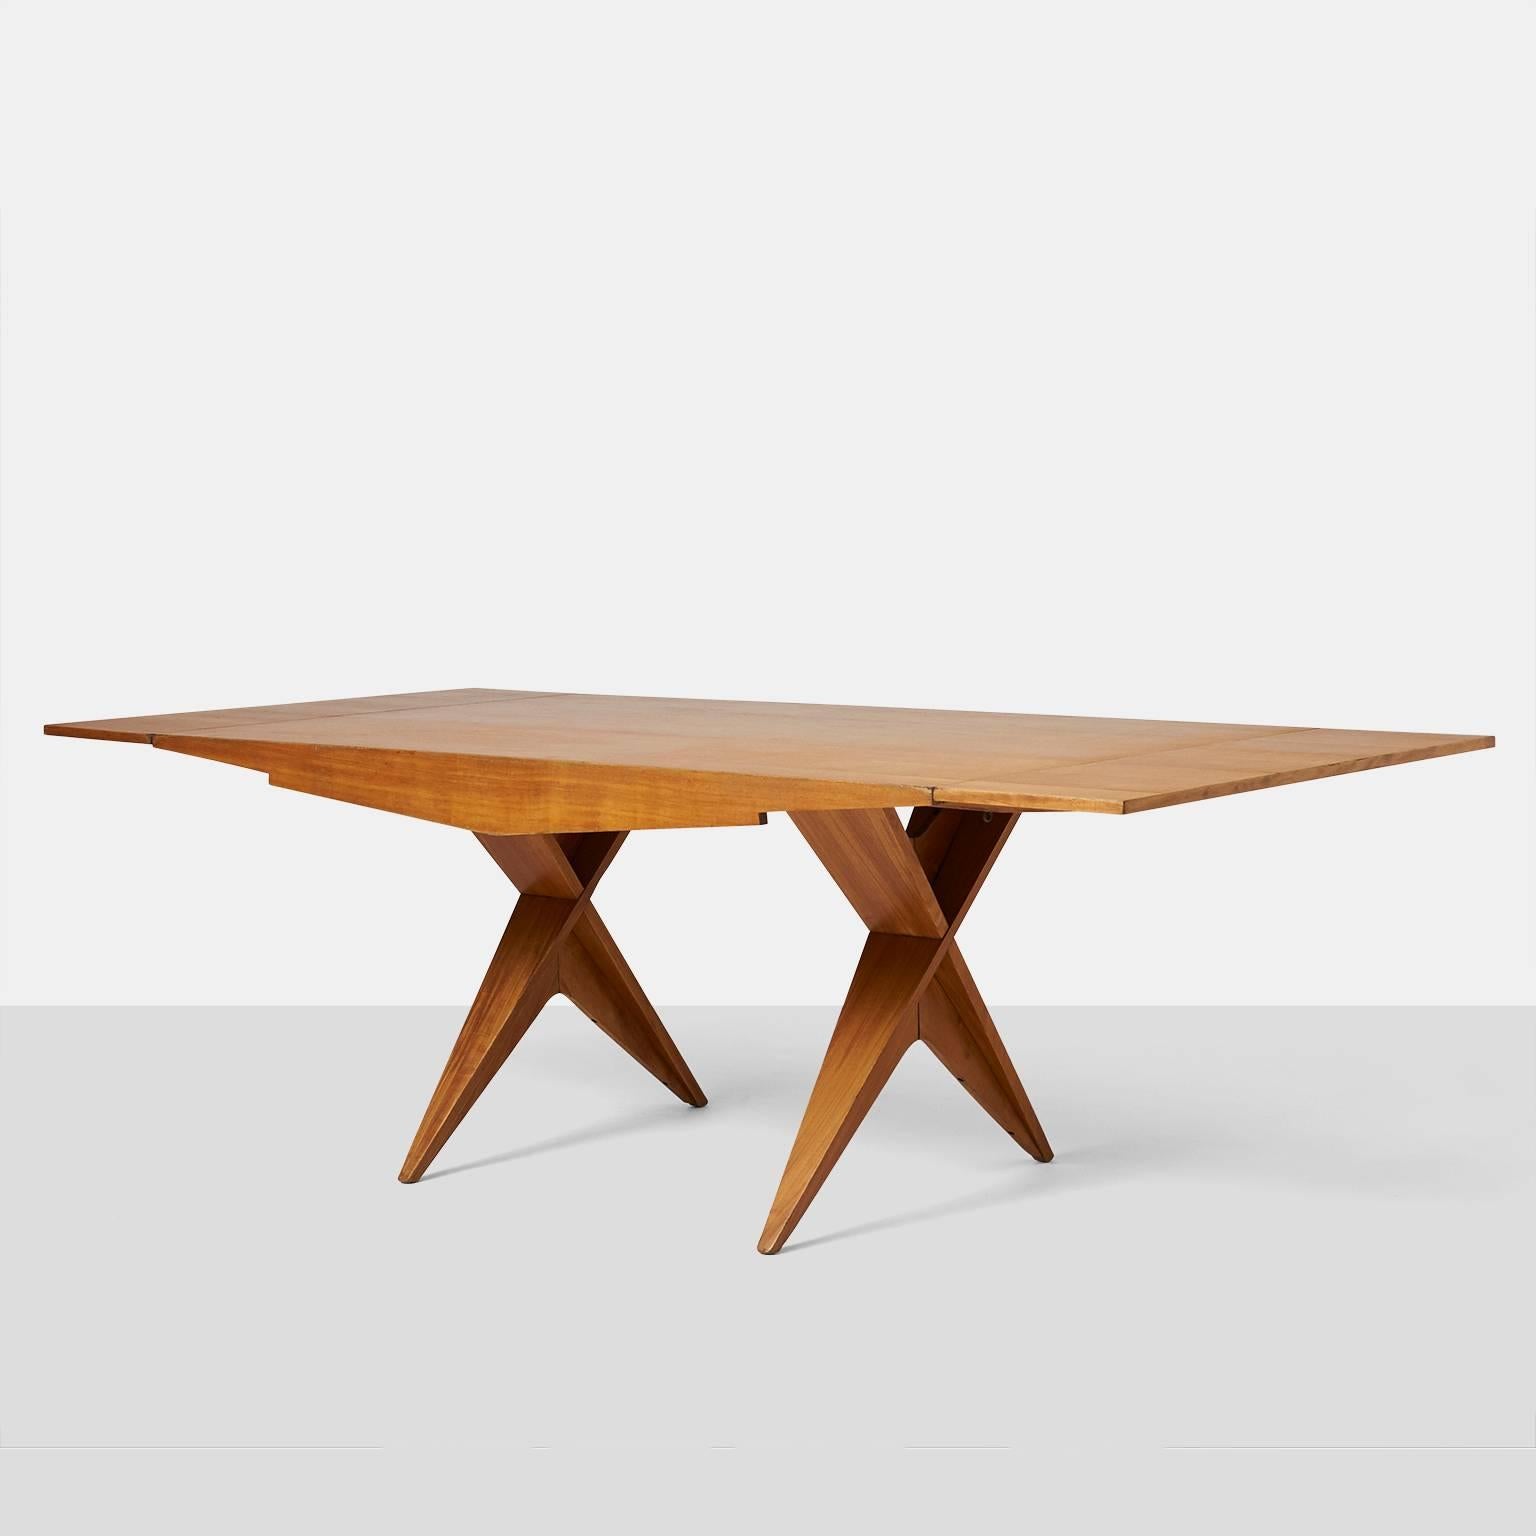 A drop-leaf dining table in blonde mahogany on architectural X-base legs by Californian designer Dan Johnson. With the leaves extended the table measures 90